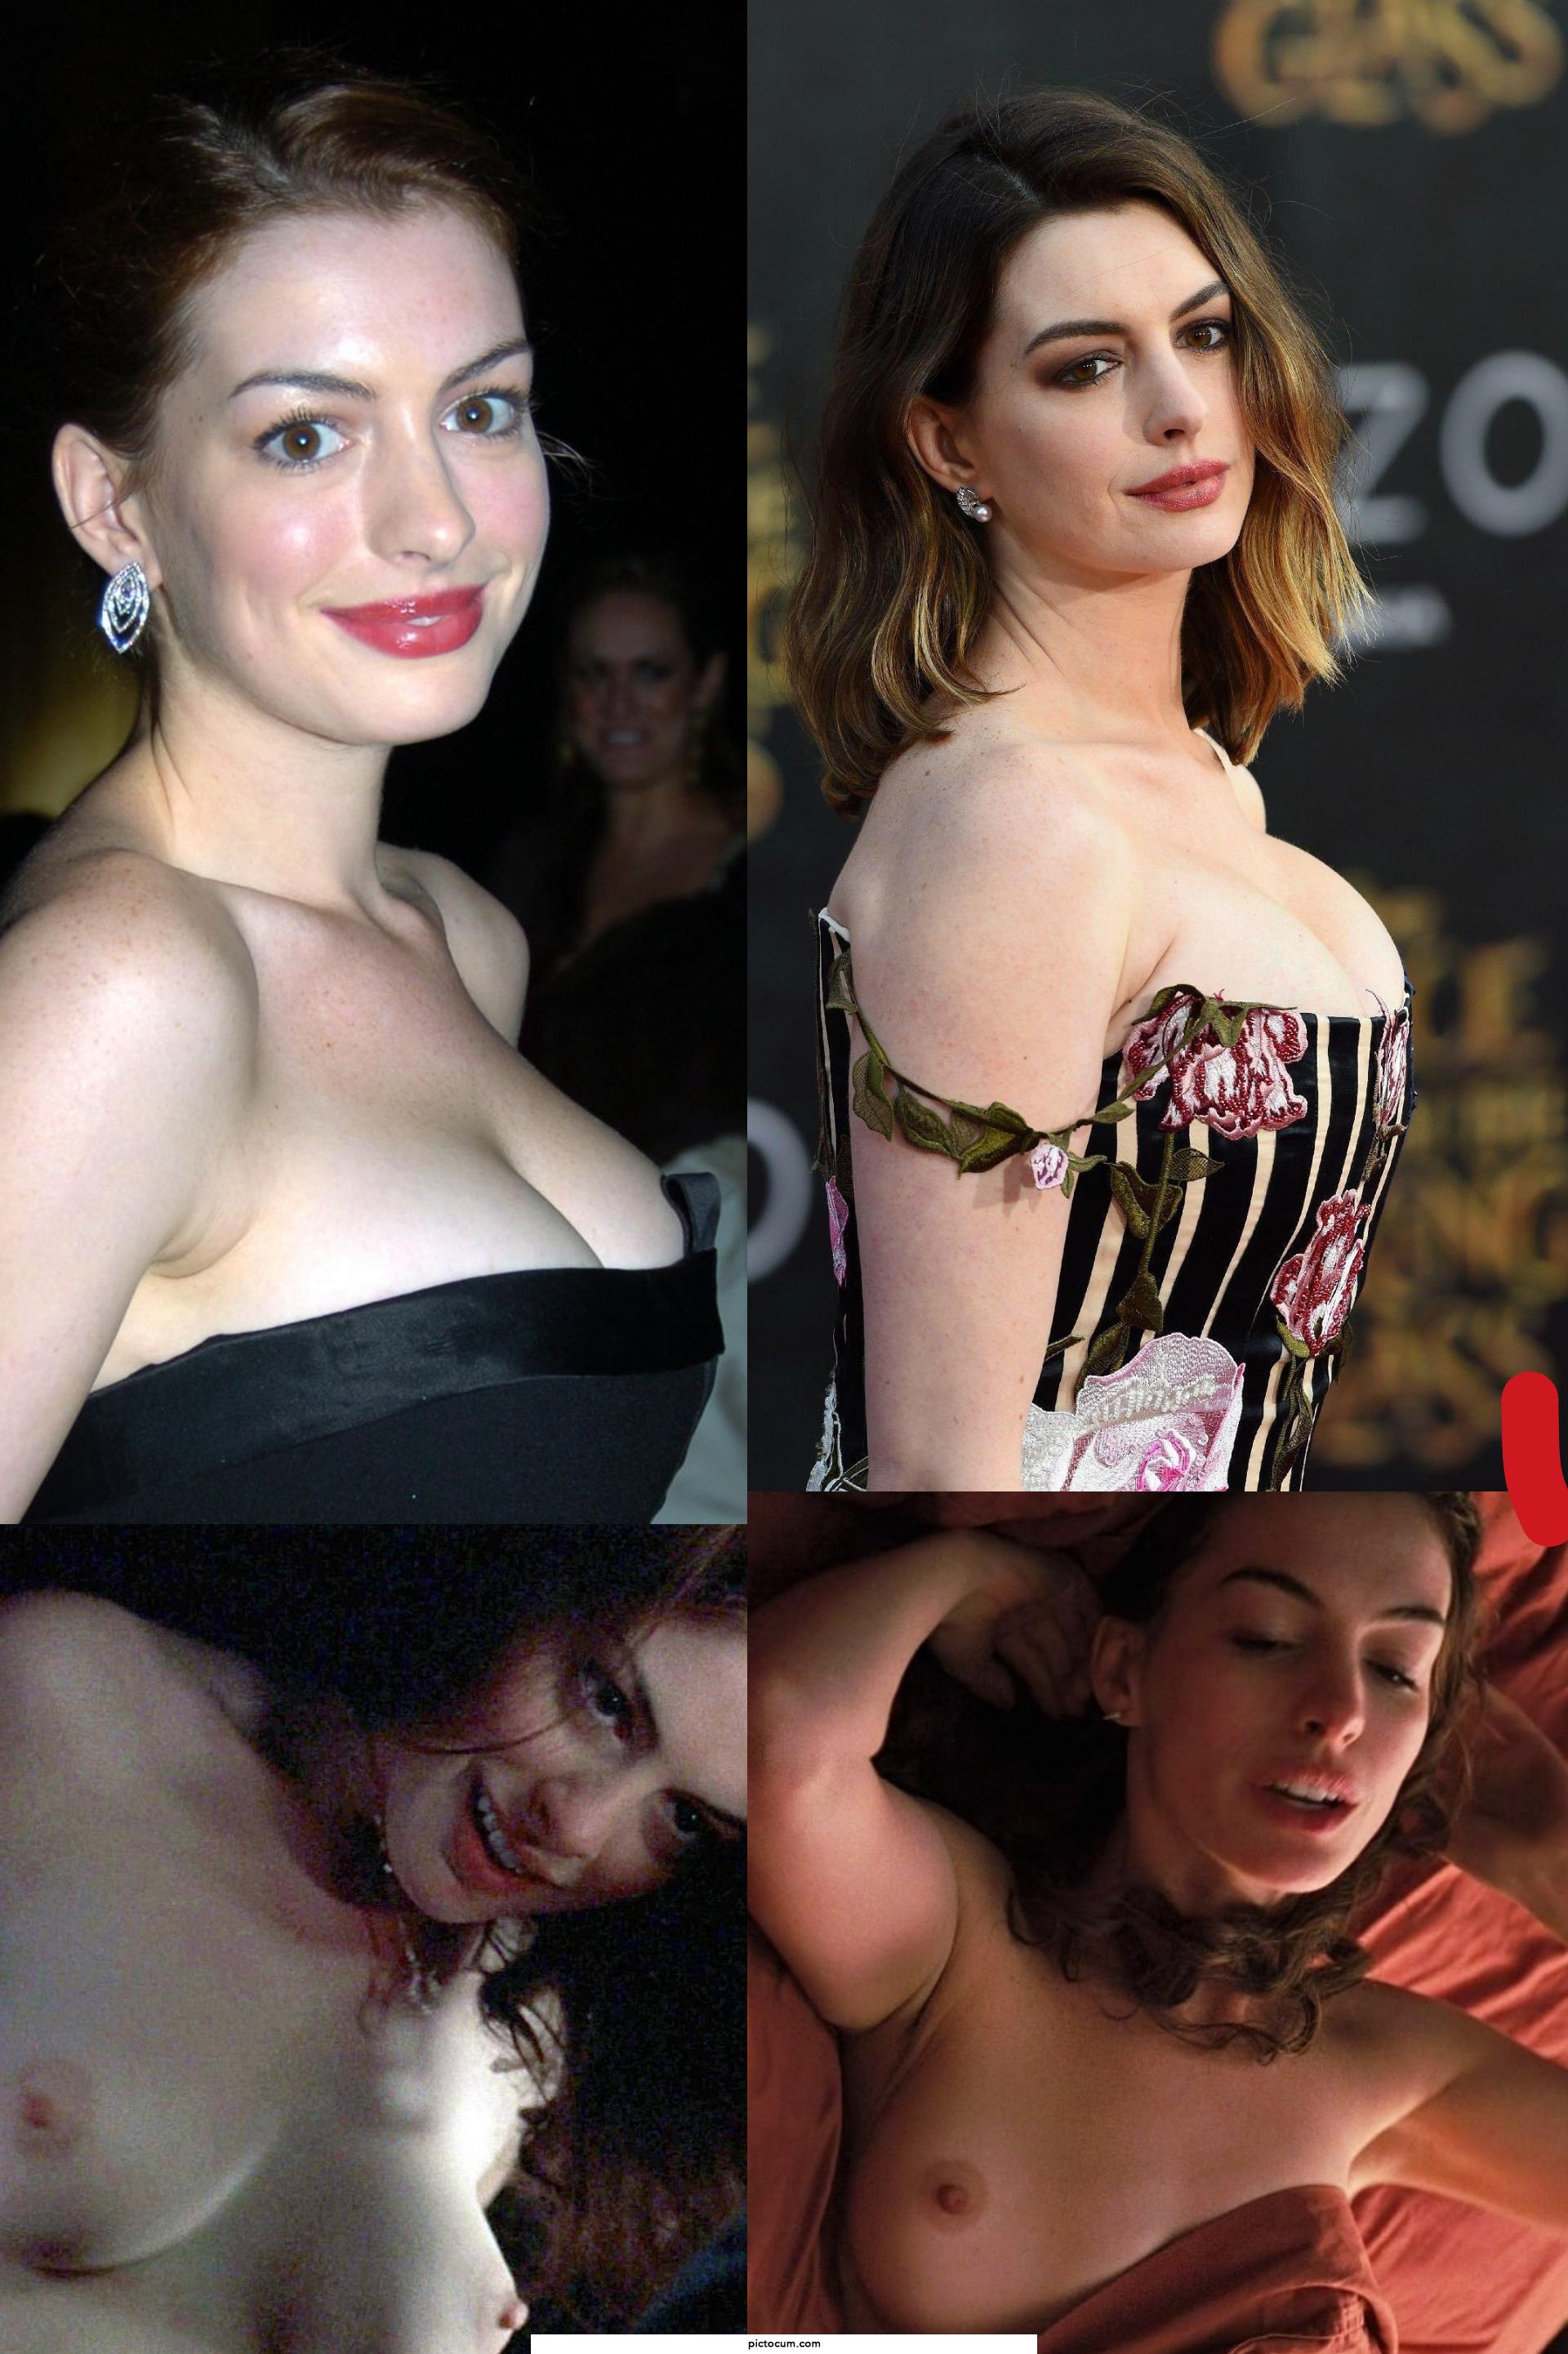 Anne Hathaway on and off - 2000s and 2010s